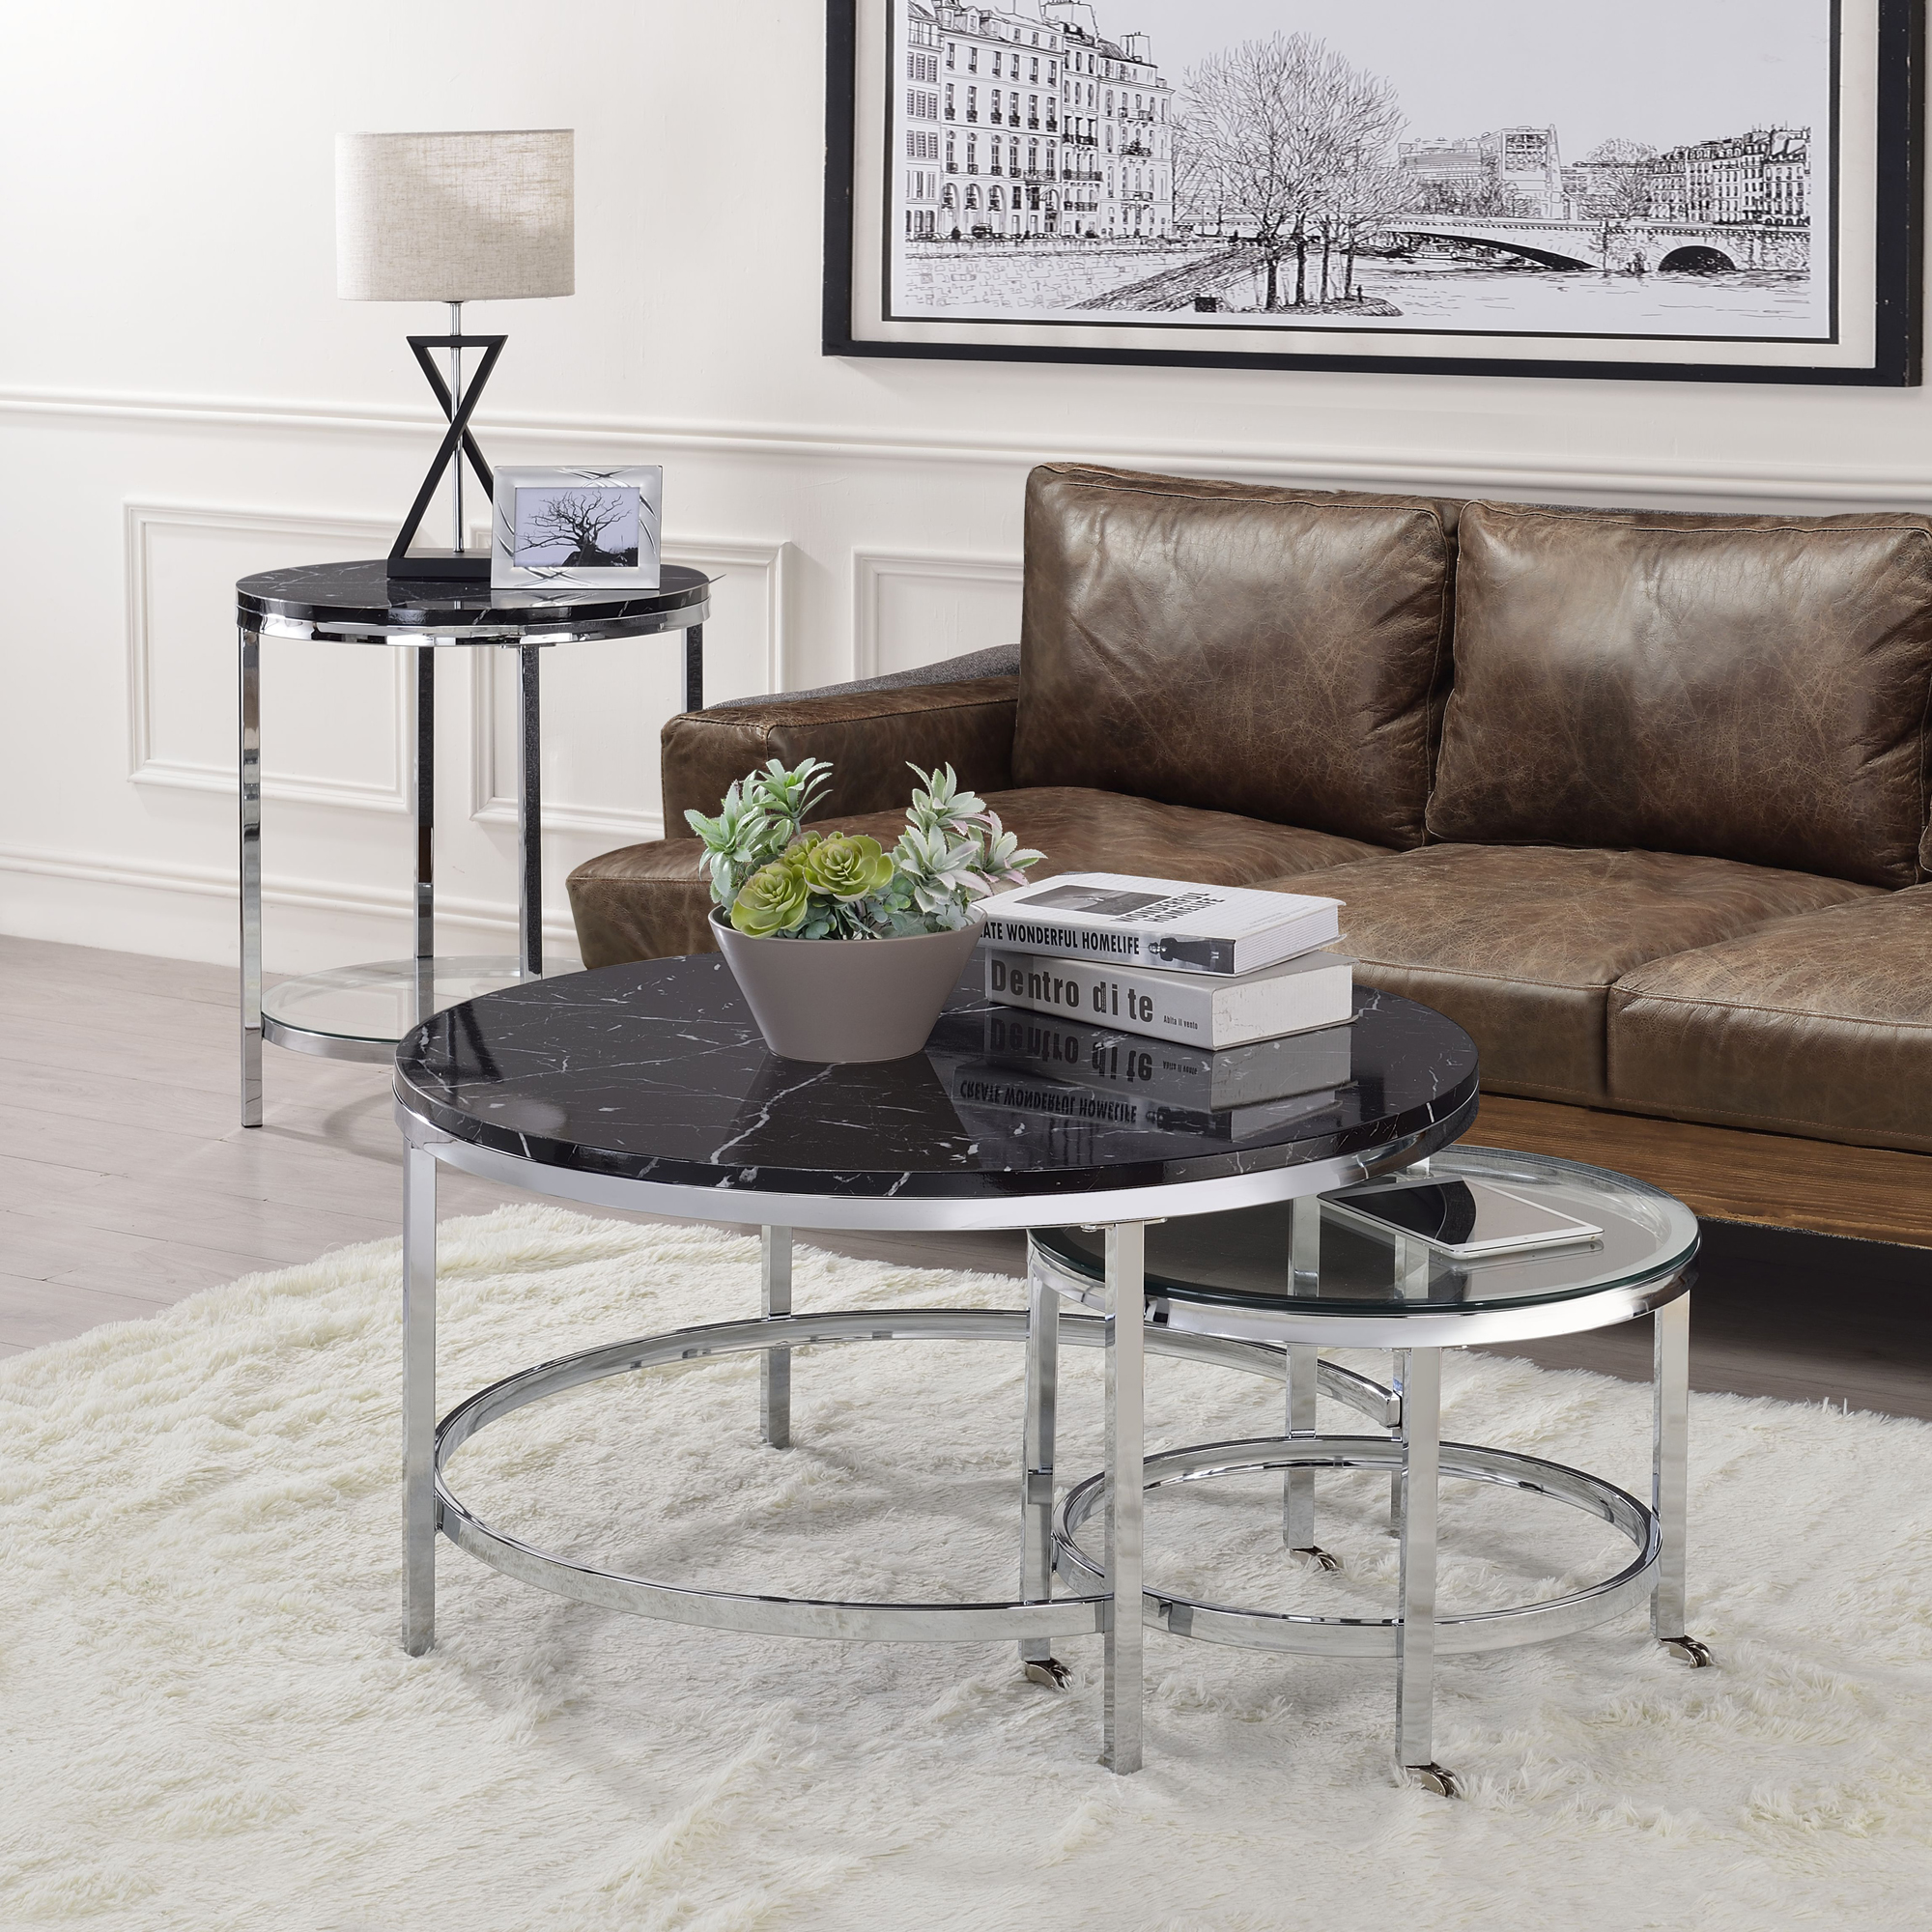 ACME Virlana Round End Table in Black and Chrome - image 4 of 5